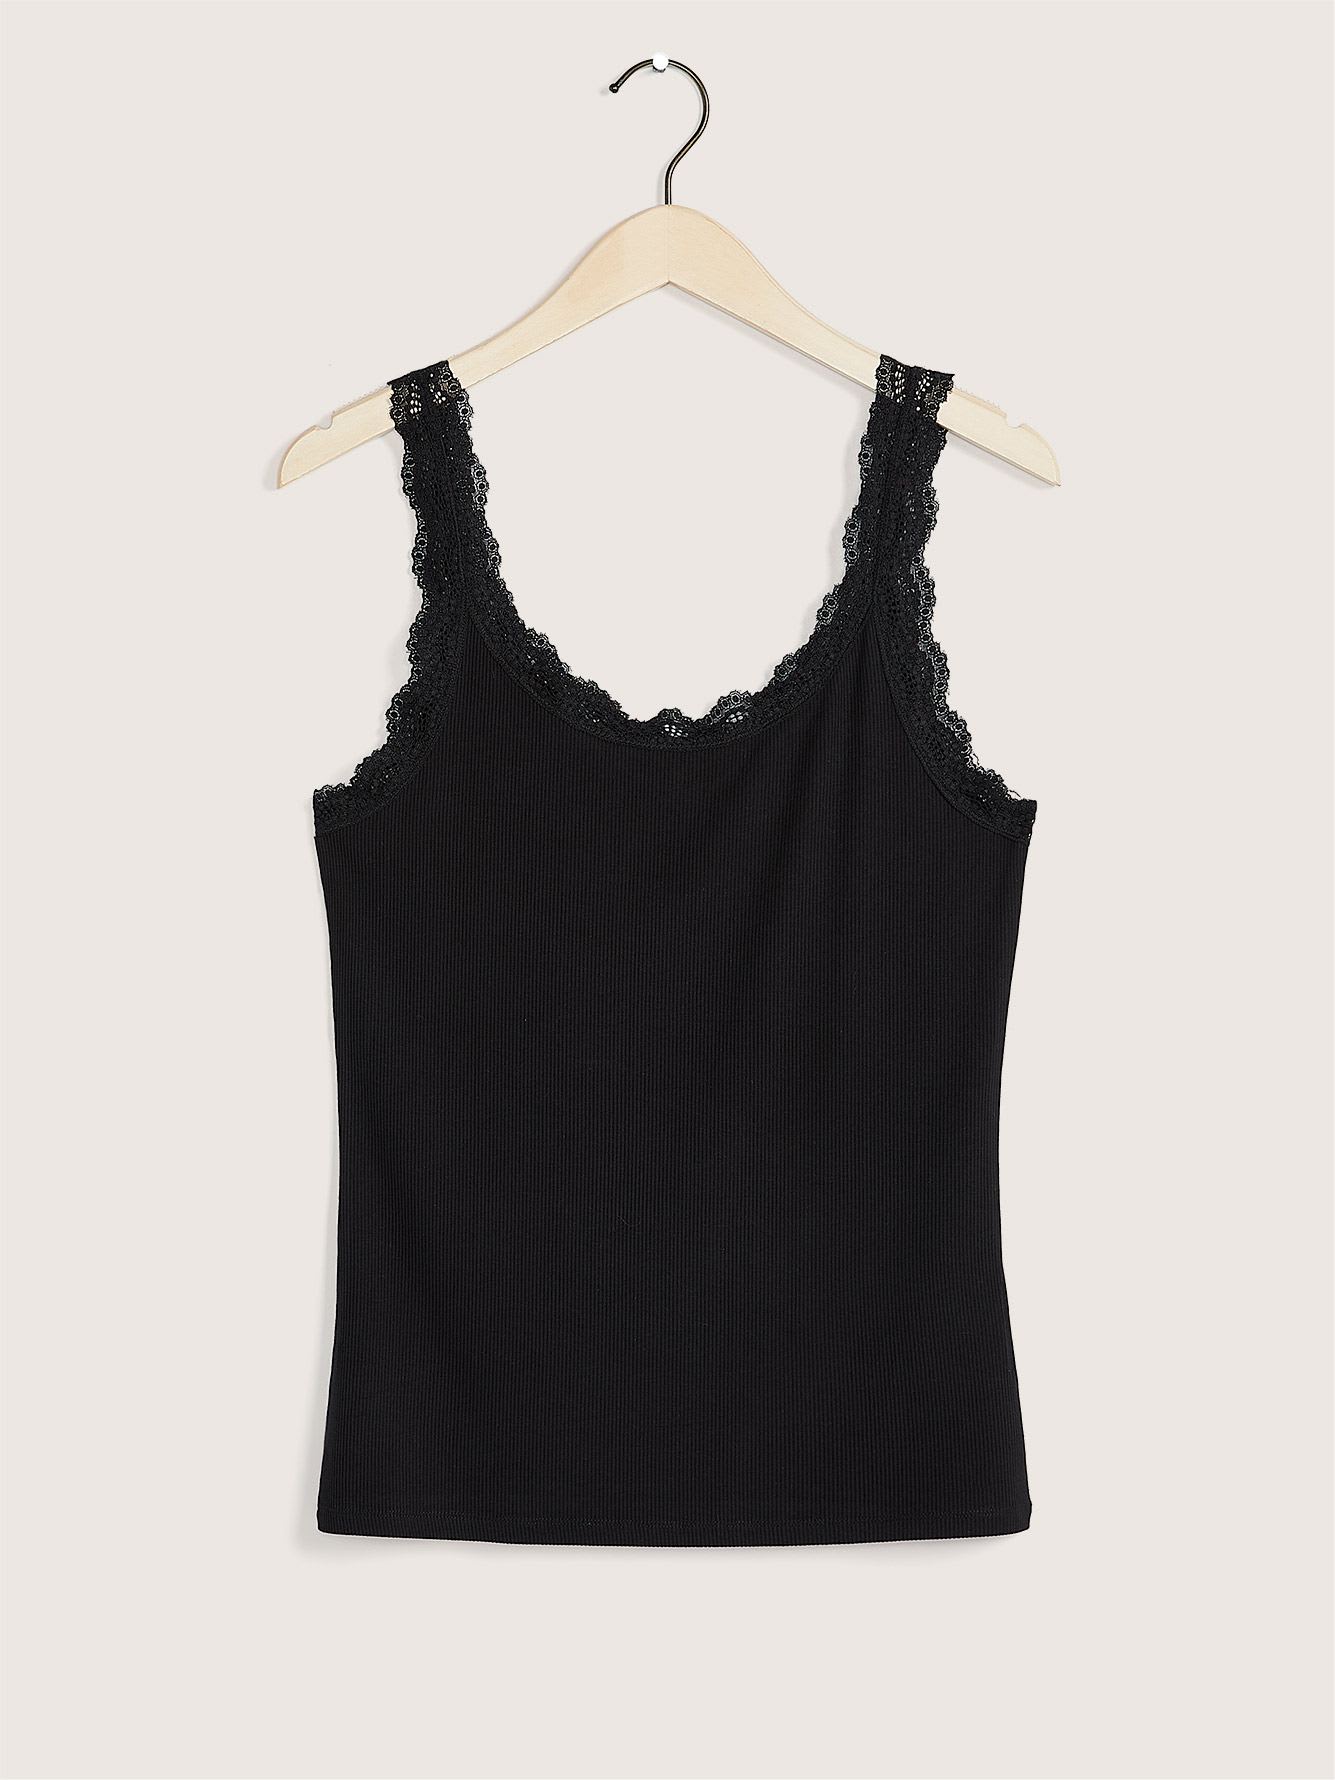 Reversible Cami with Lace Details - Addition Elle